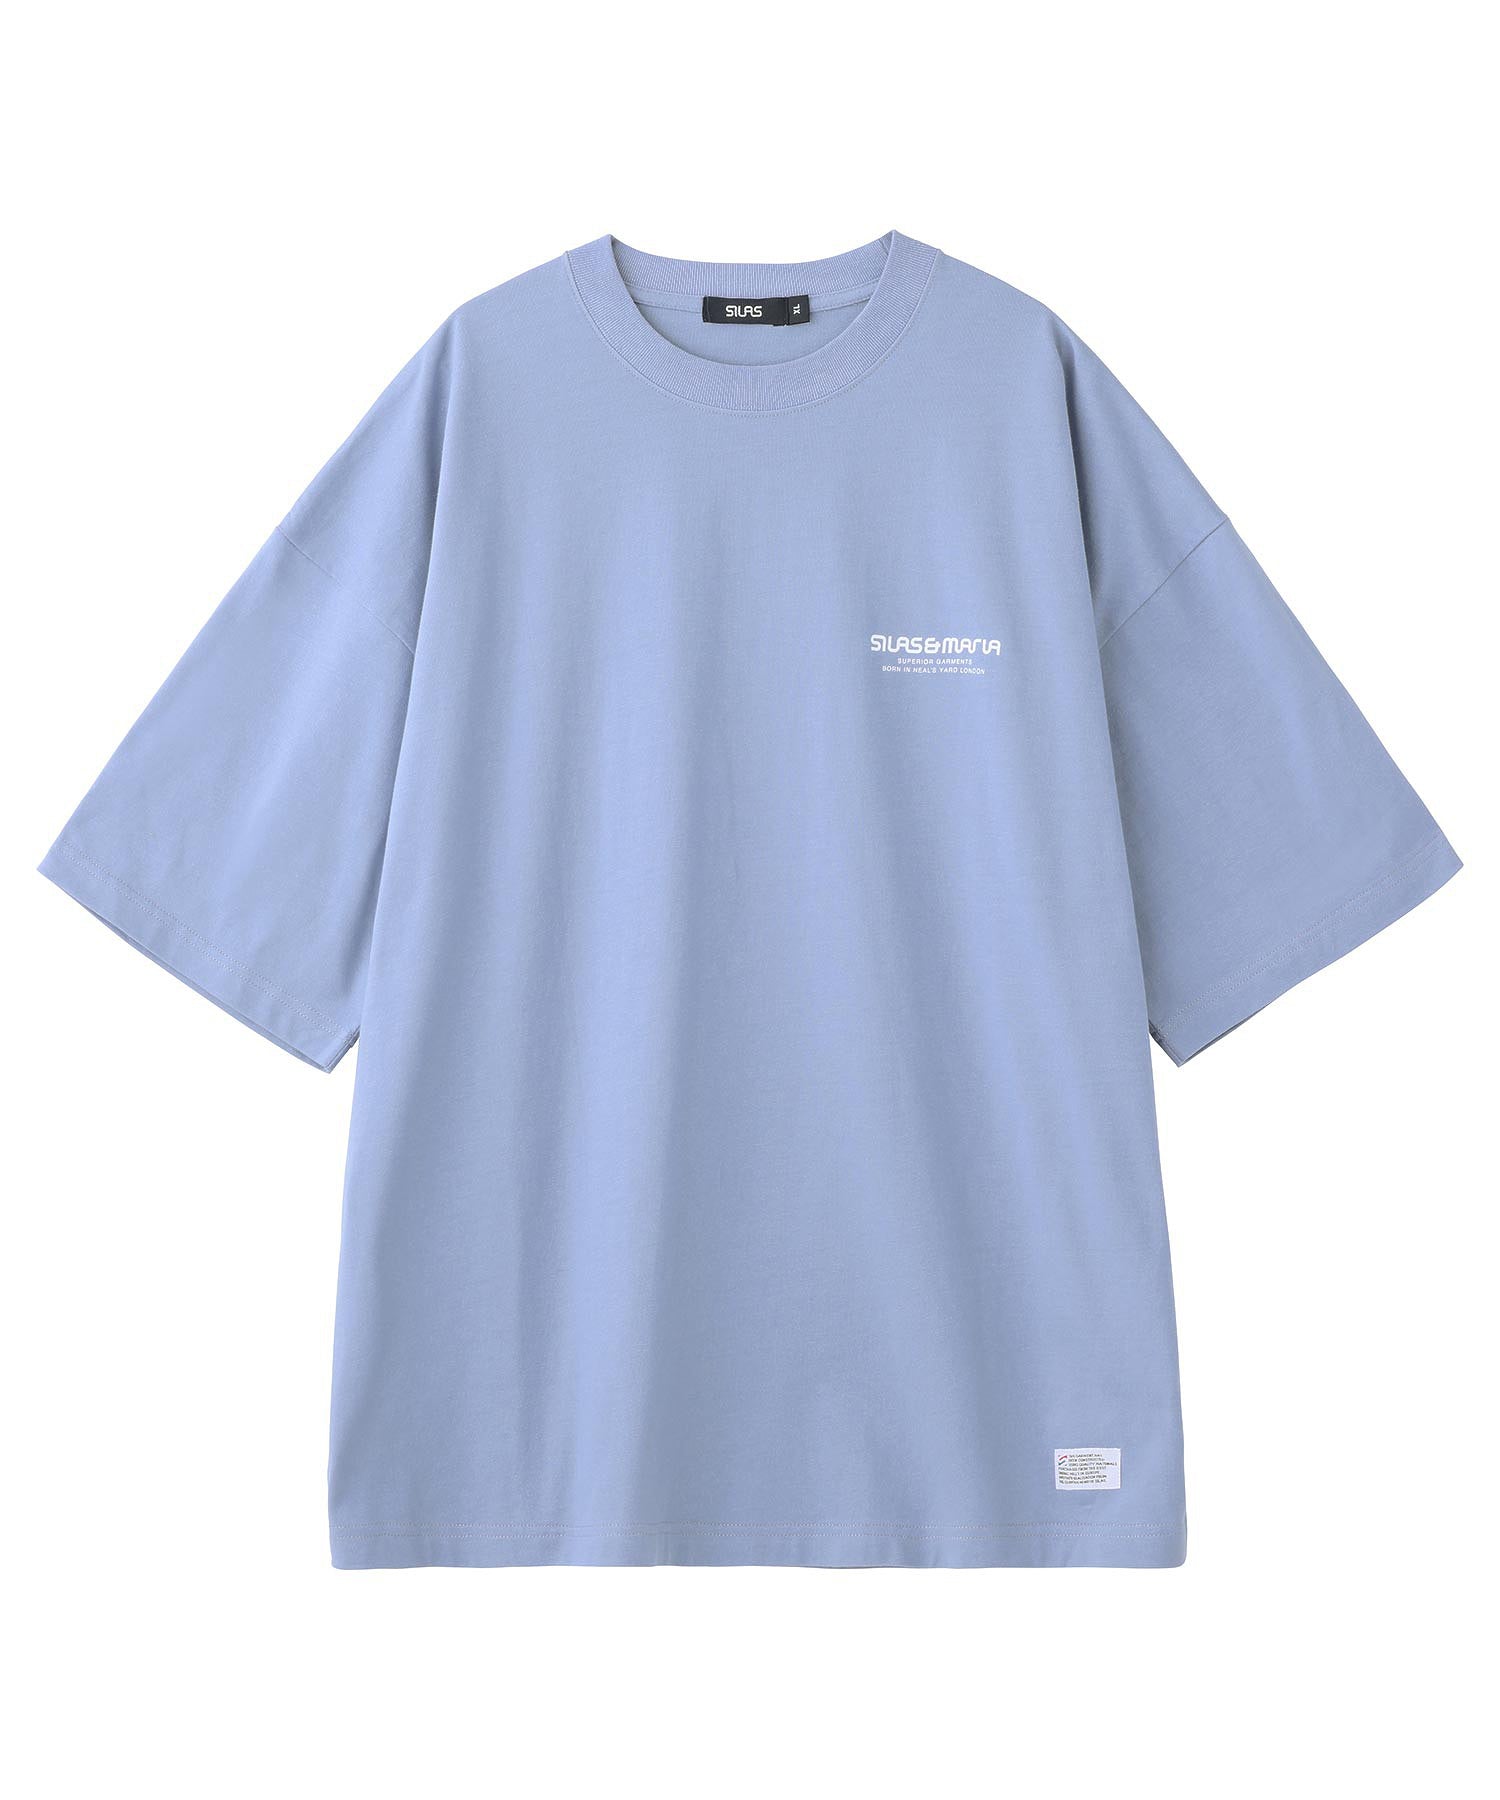 SILAS AND MARIA LOGO WIDE S/S TEE